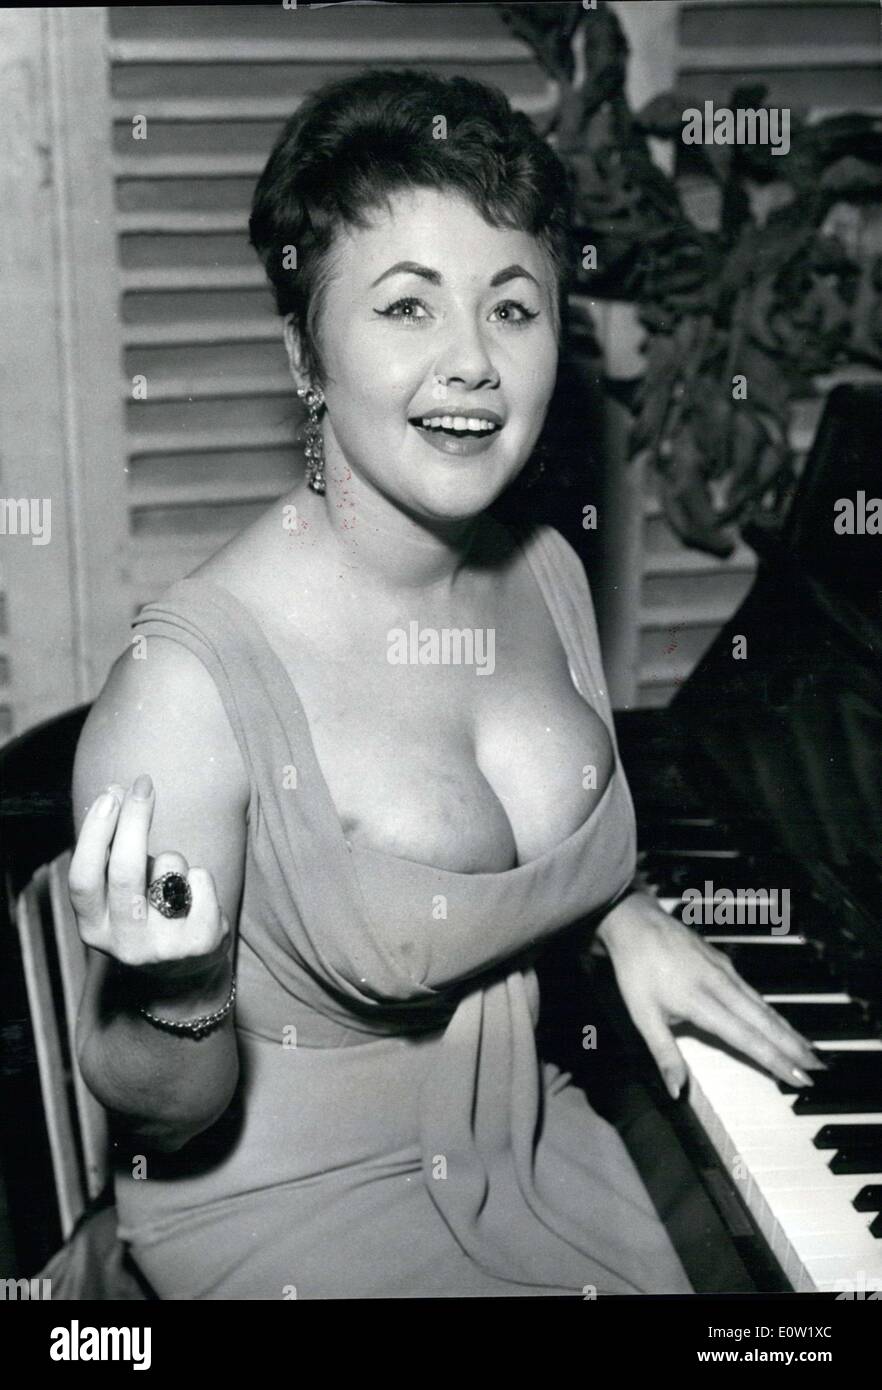 Dec. 06, 1960 - This buxom 25 year-old English singer, Gail Mitchell, is in Paris right now where she will start off performances in a famous Saint-Germain des Pres cabaret in a few days. Stock Photo